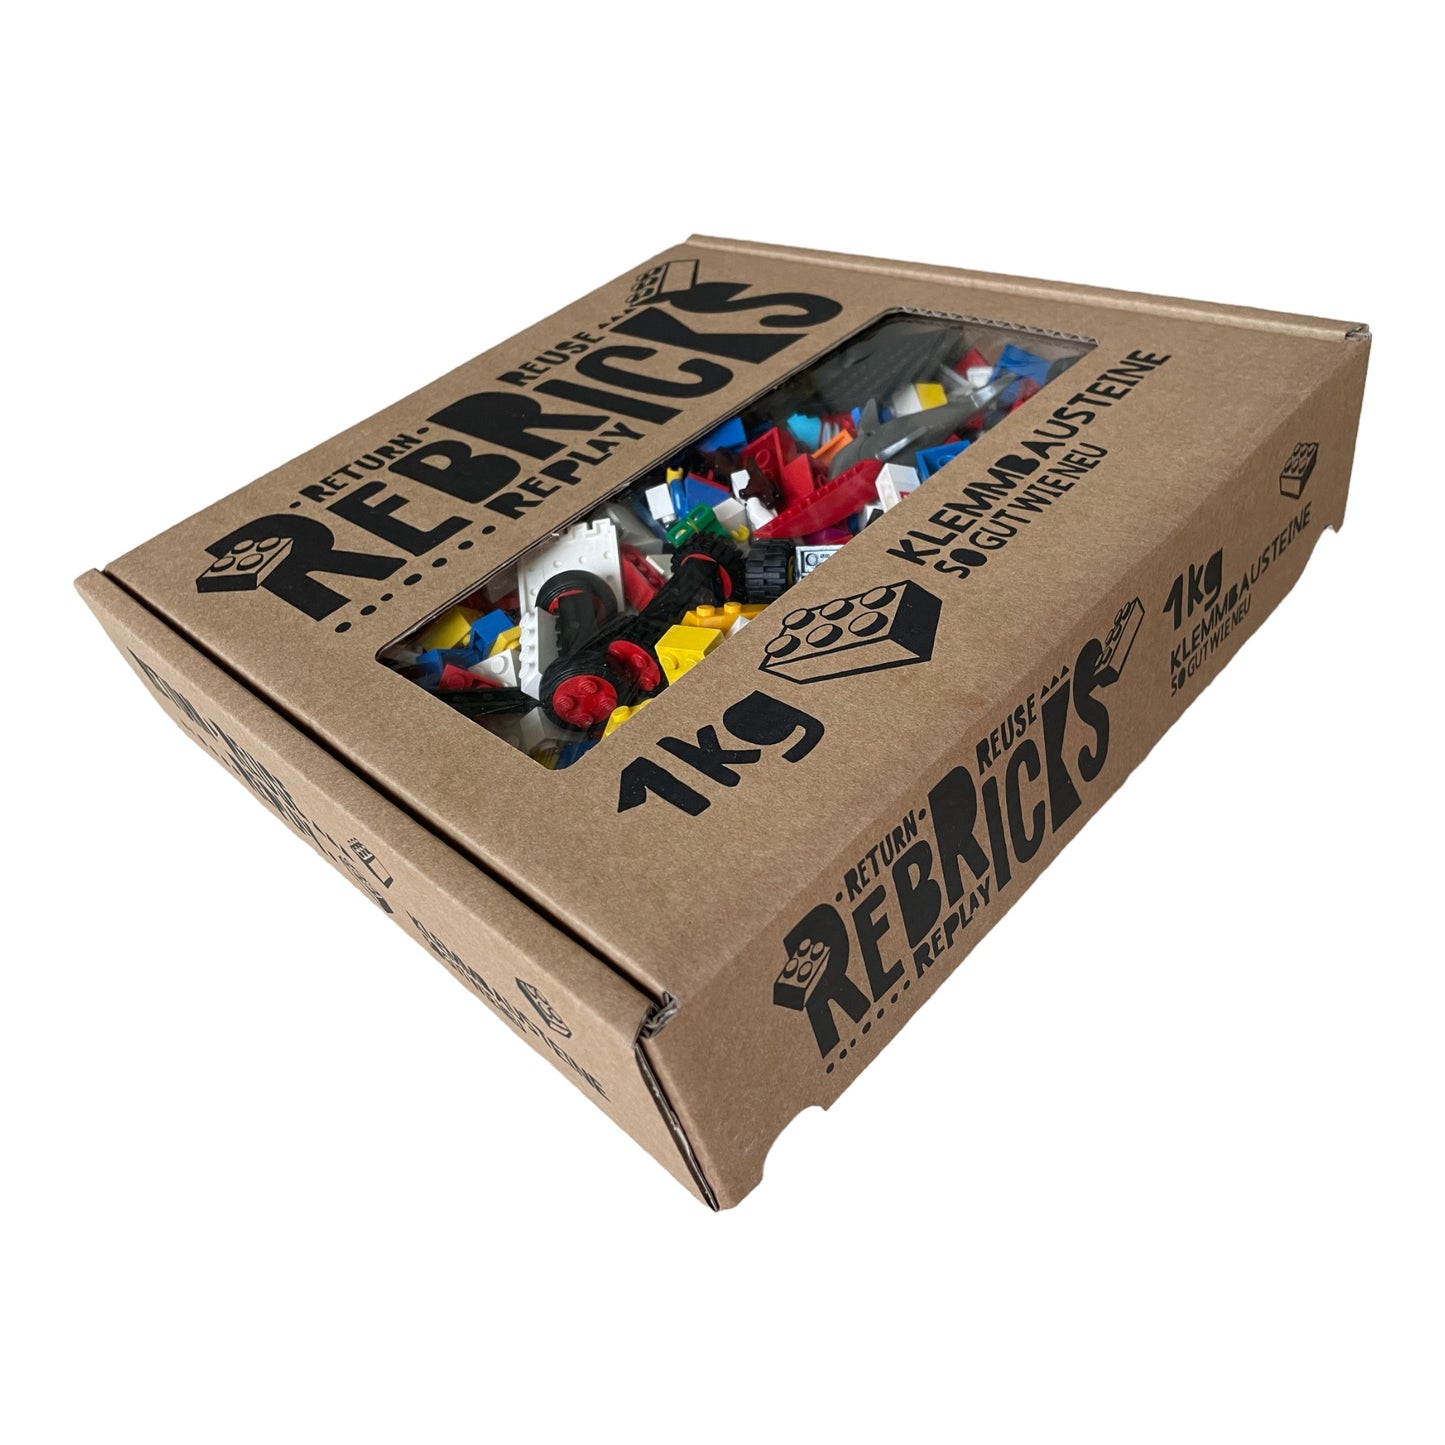 Rebricks - Box of 1 kilo of used, cleaned building blocks from Lego® or other compatible brands. As good as new !